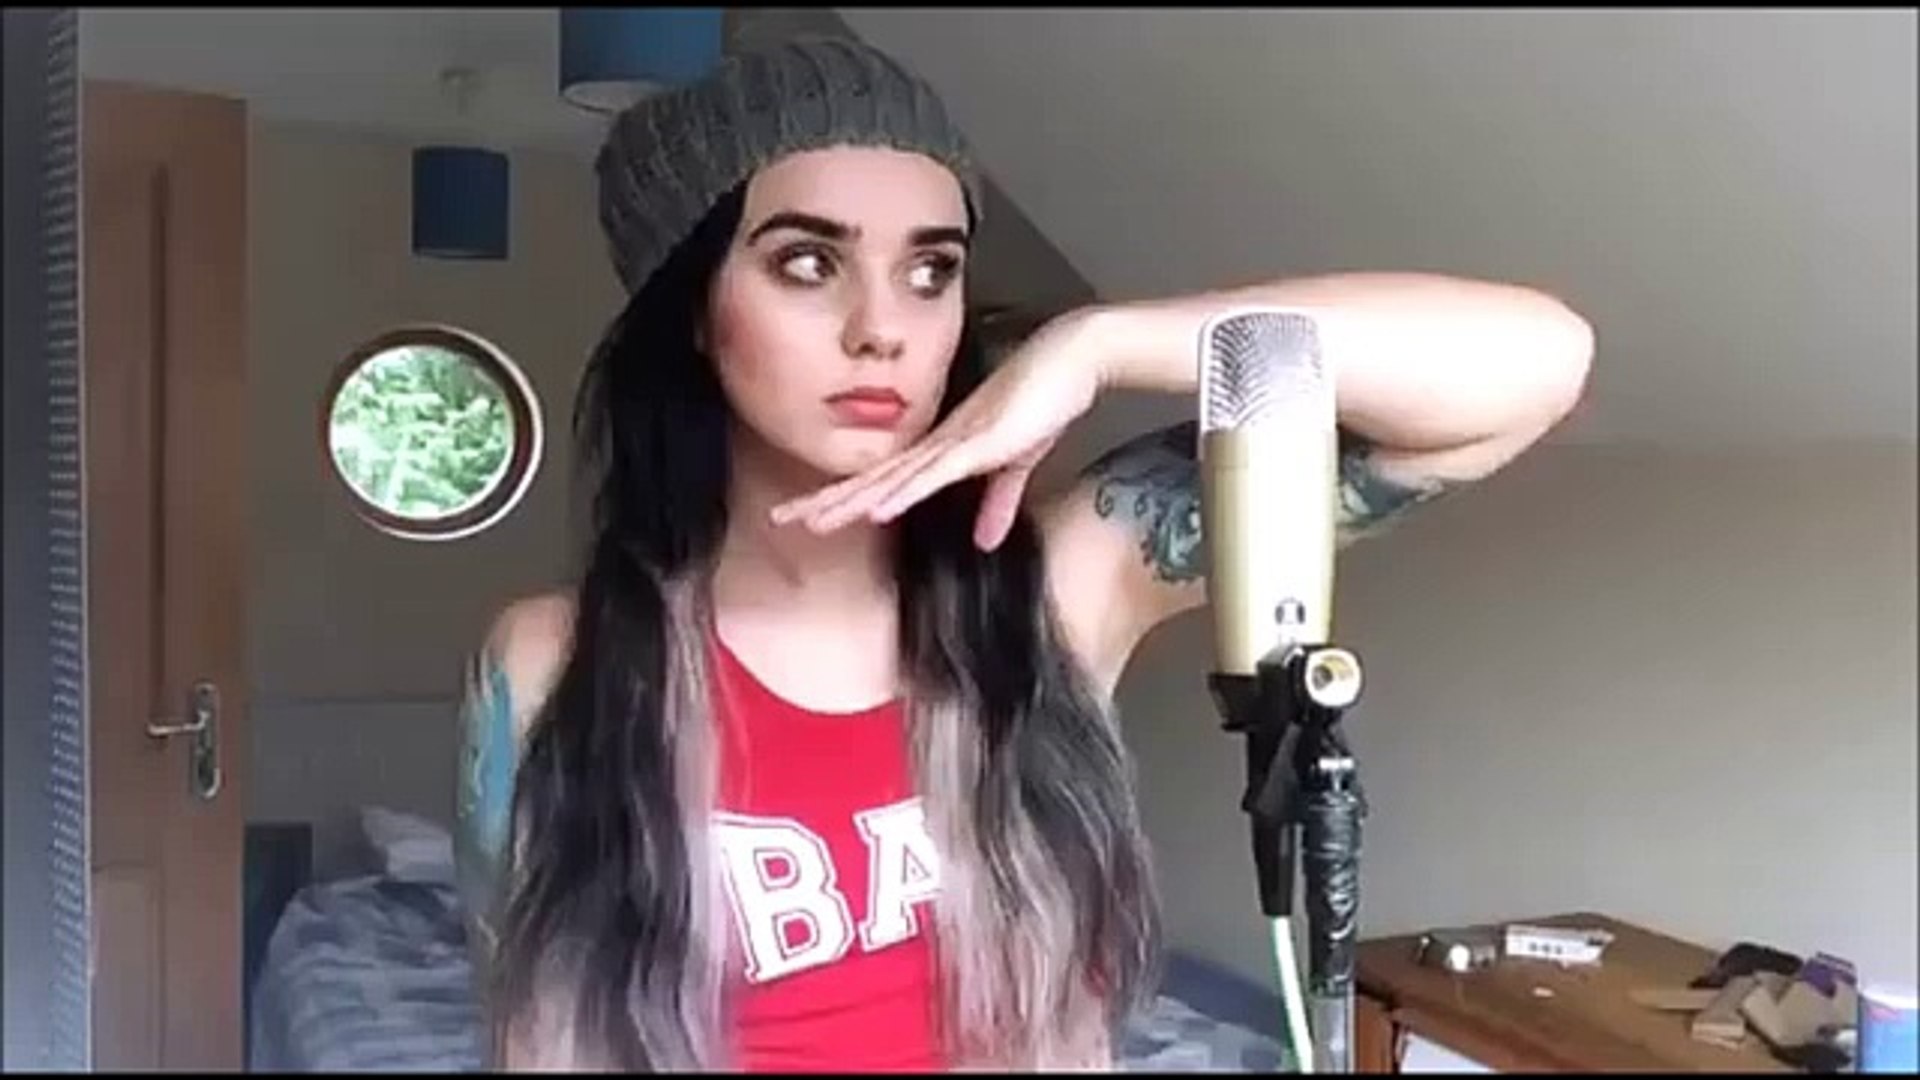 Style_Colors - SEAFOAL (Taylor Swift & Halsey Mash-Up Cover)